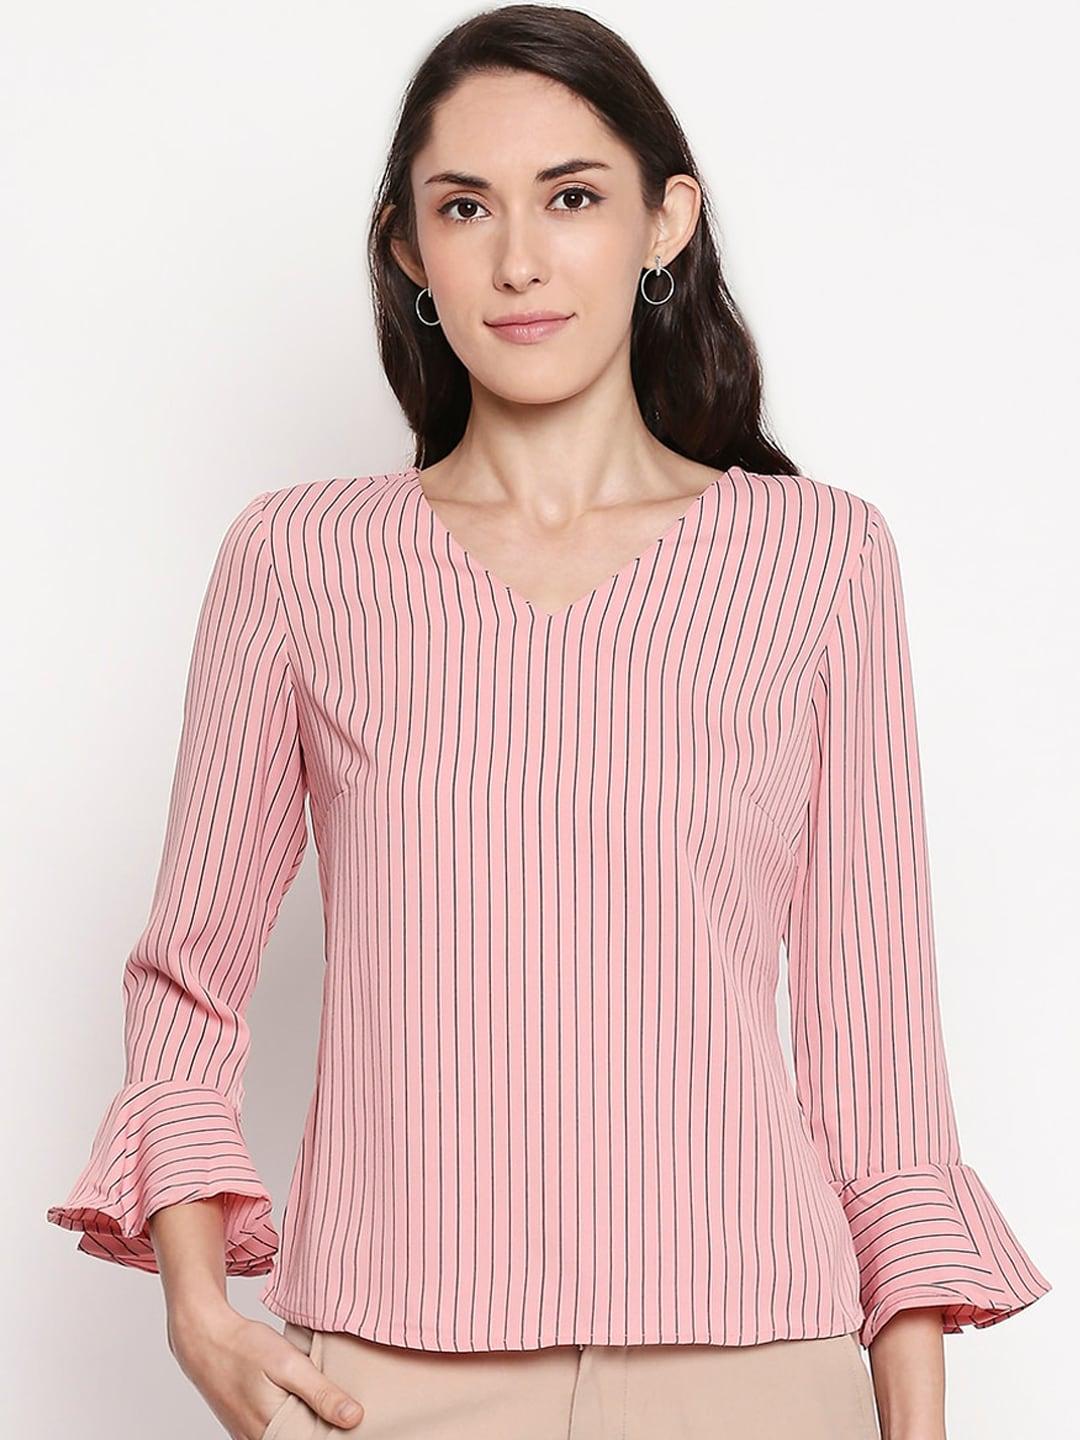 Annabelle by Pantaloons Women Pink Striped Top